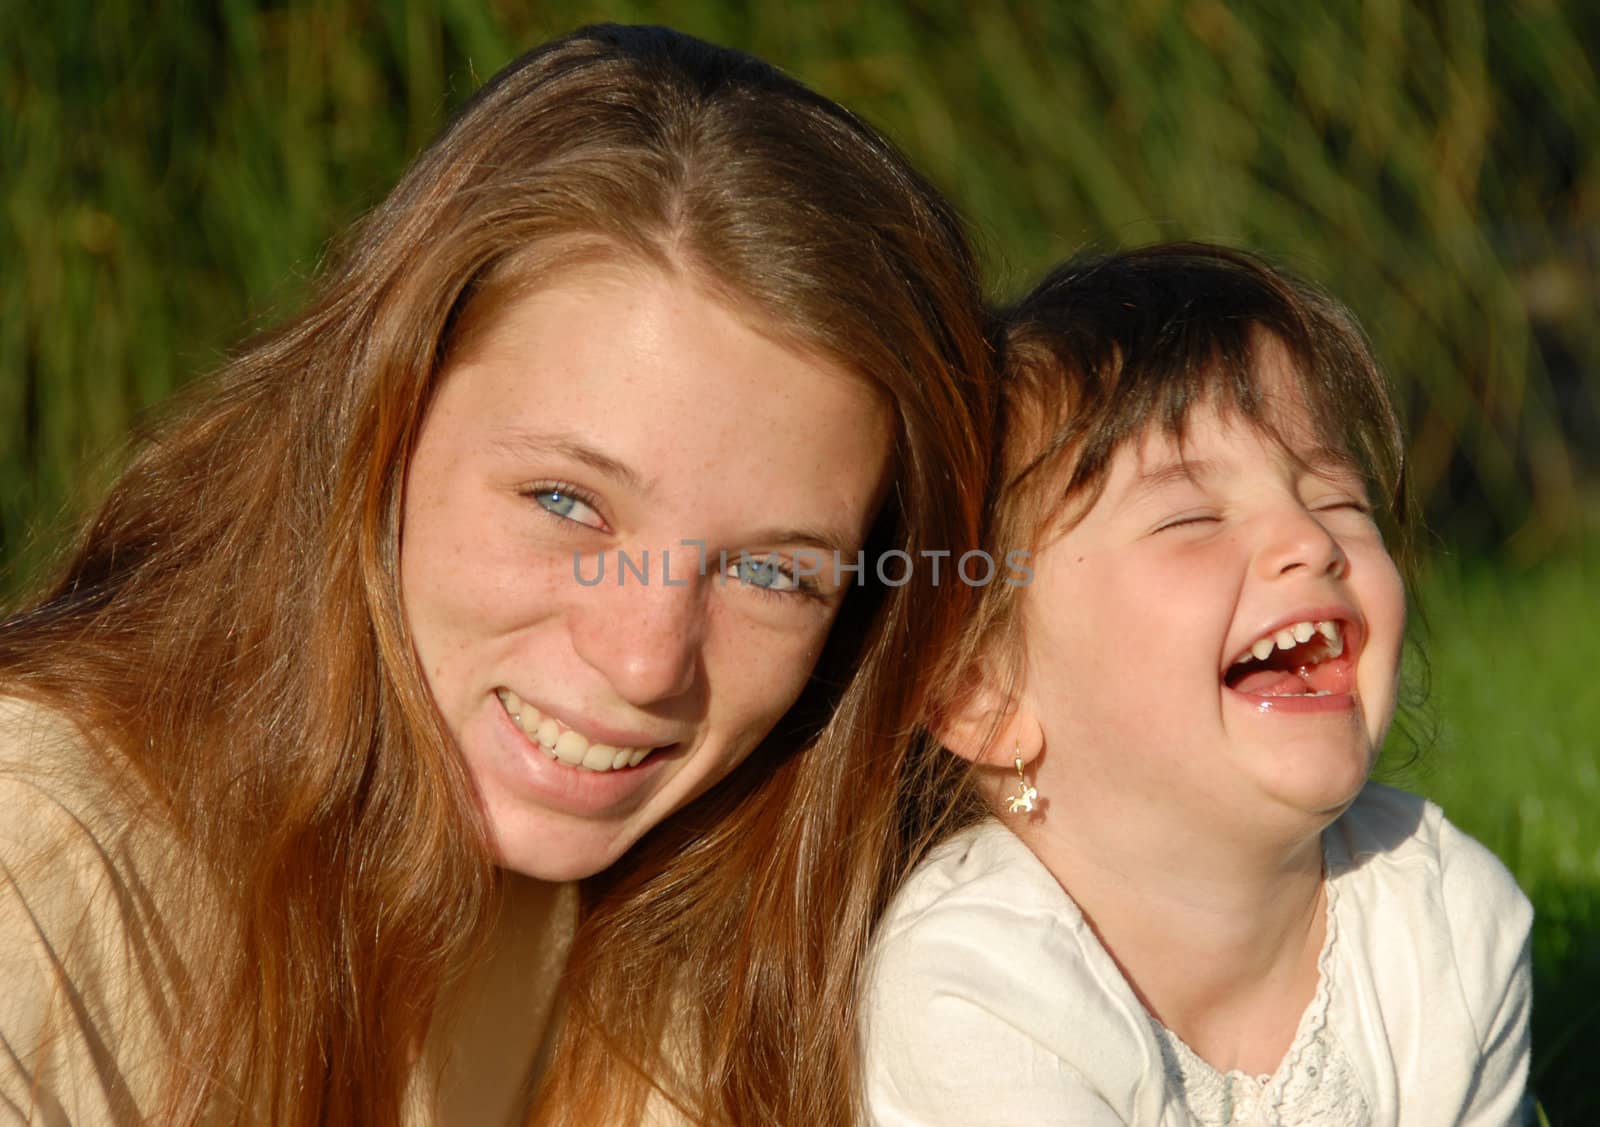 two smiling sisters: teenager and little girl

